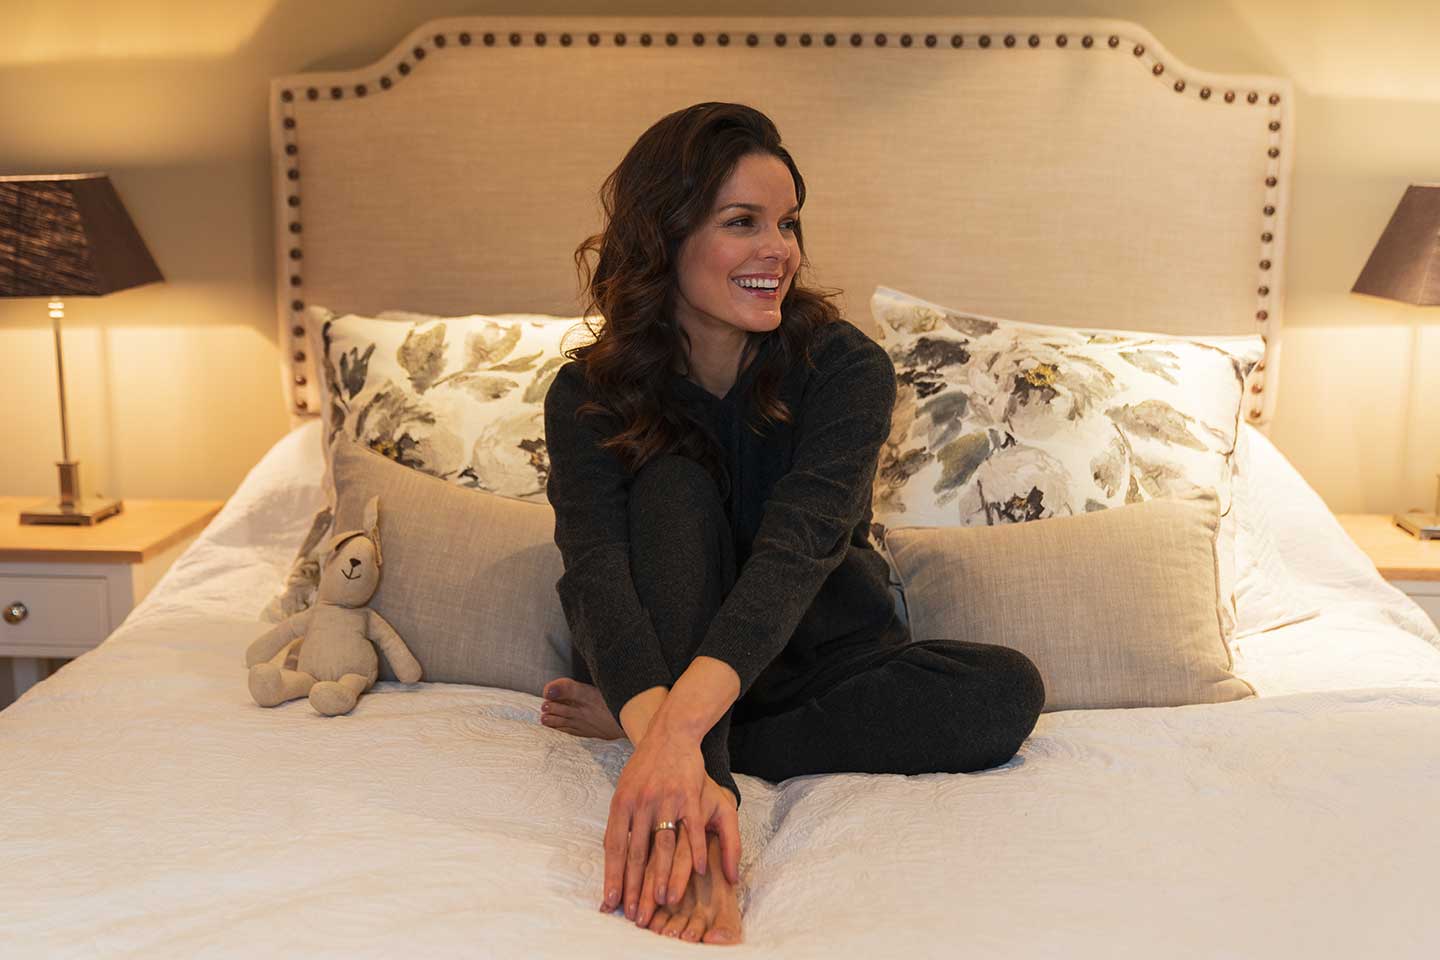 cashmere pyjamas and cashmere loungewear worn to bed